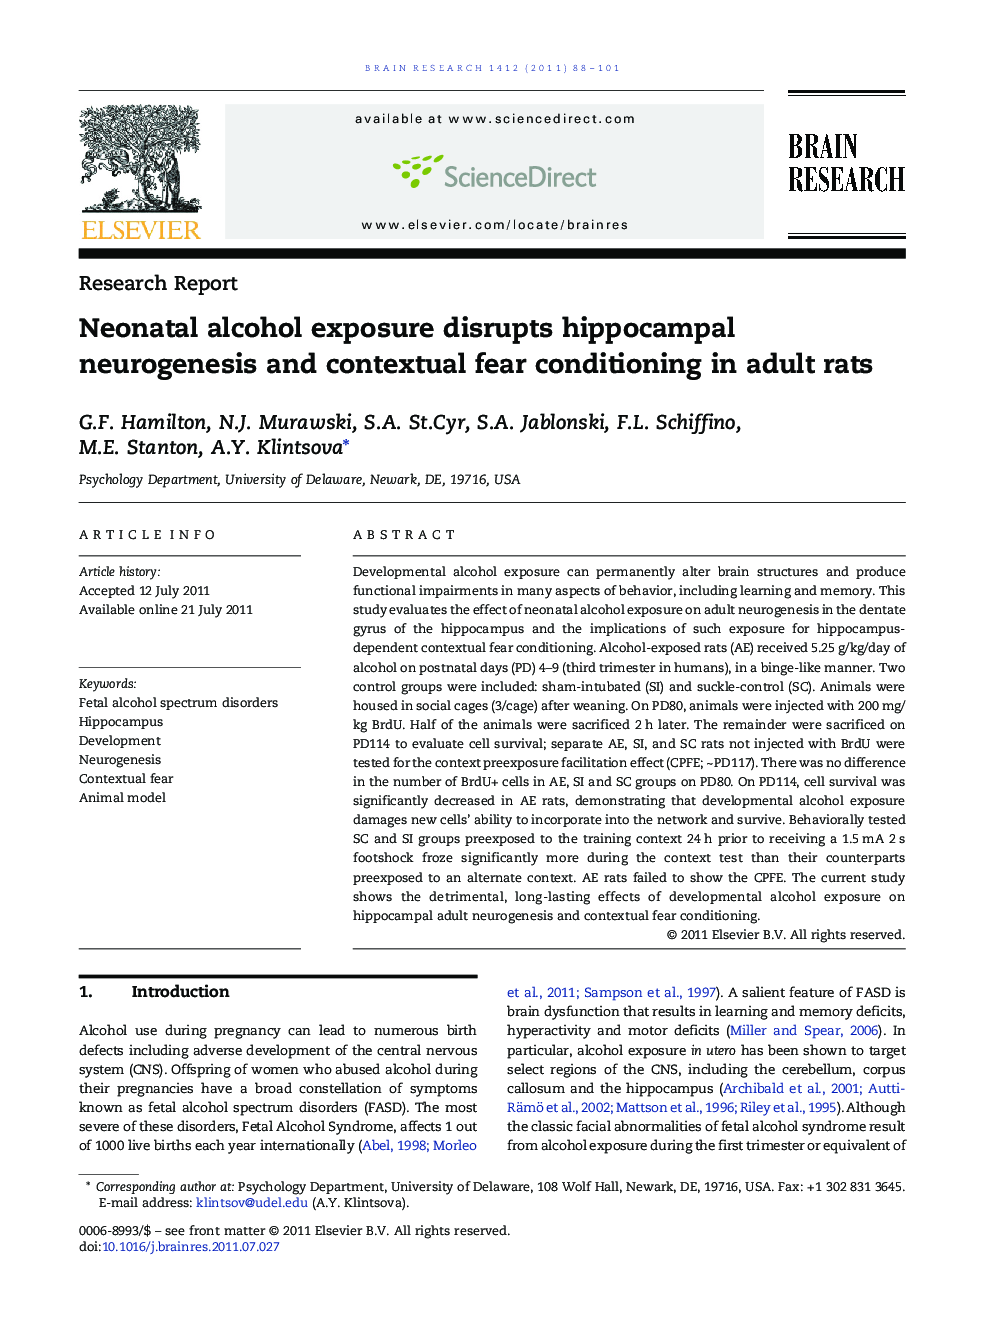 Neonatal alcohol exposure disrupts hippocampal neurogenesis and contextual fear conditioning in adult rats